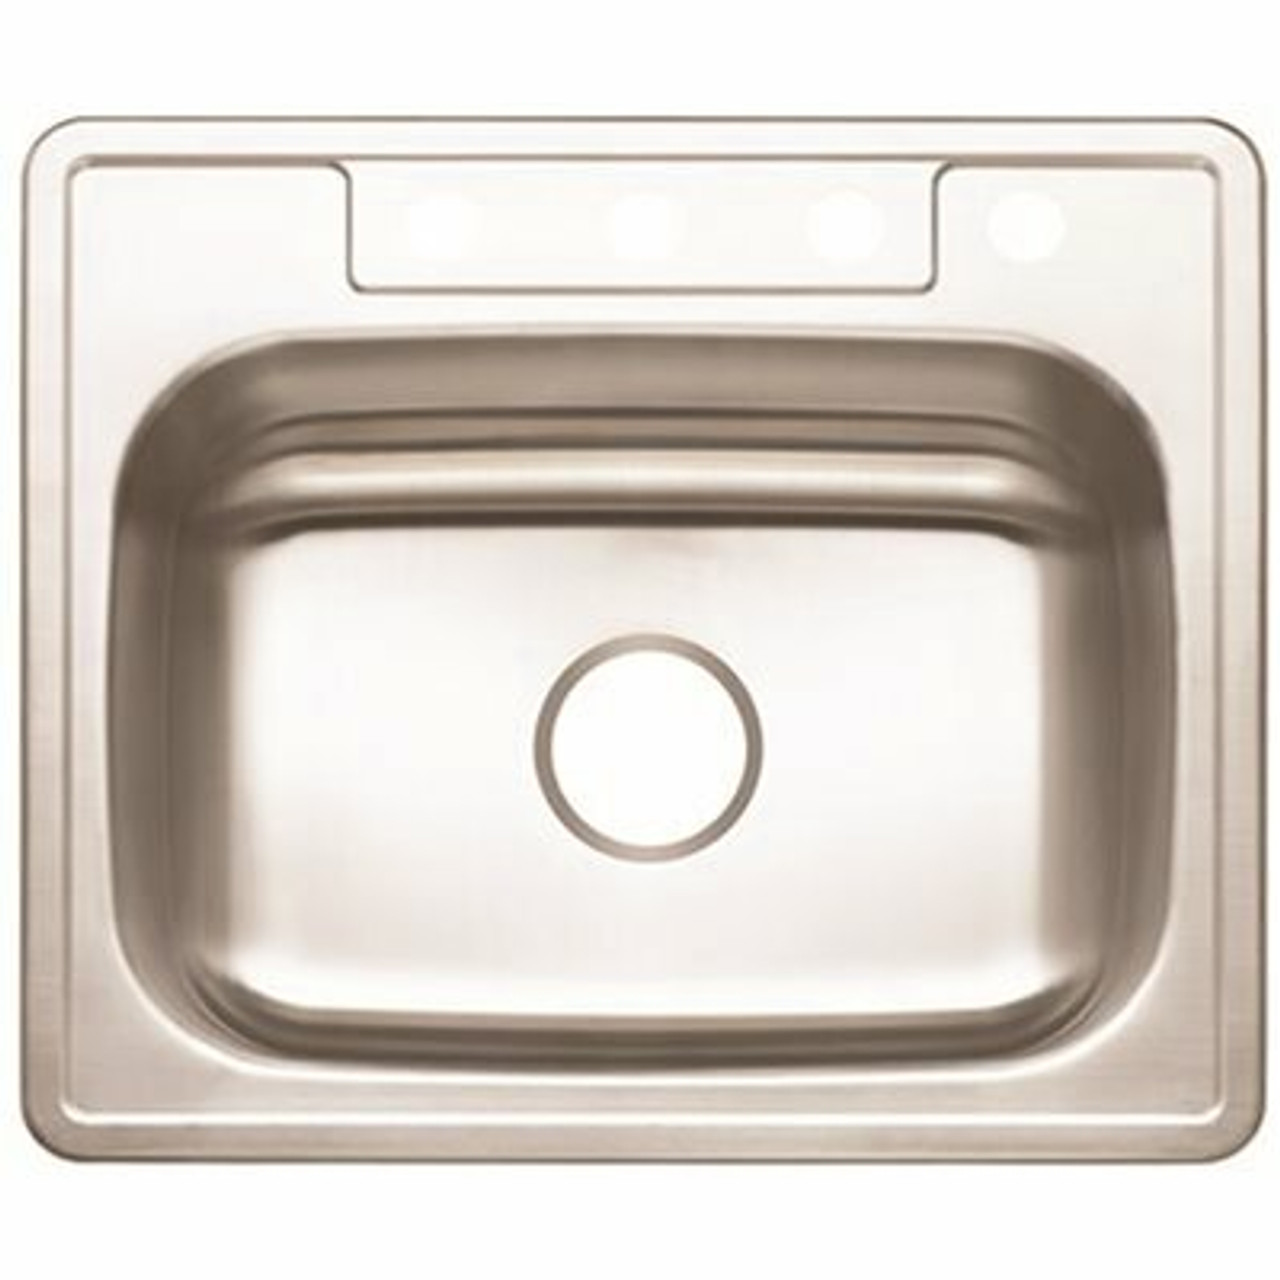 Premier Stainless Steel Kitchen Sink 25 In. 4-Hole Single Bowl Drop-In Kitchen Sink With Brush Finish